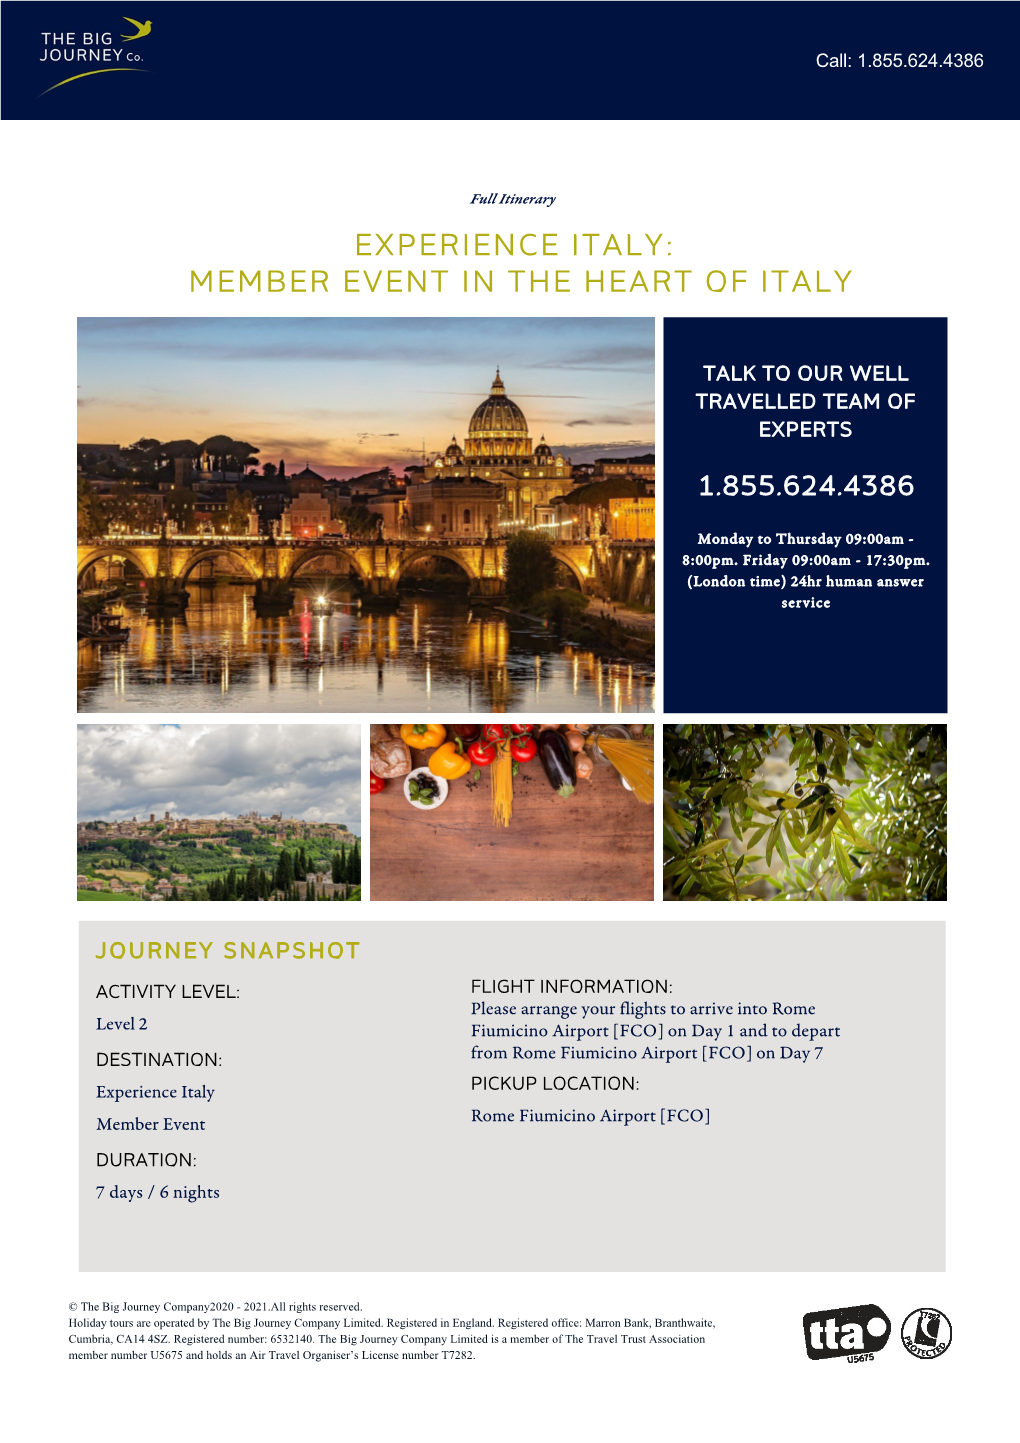 Experience Italy: Member Event in the Heart of Italy